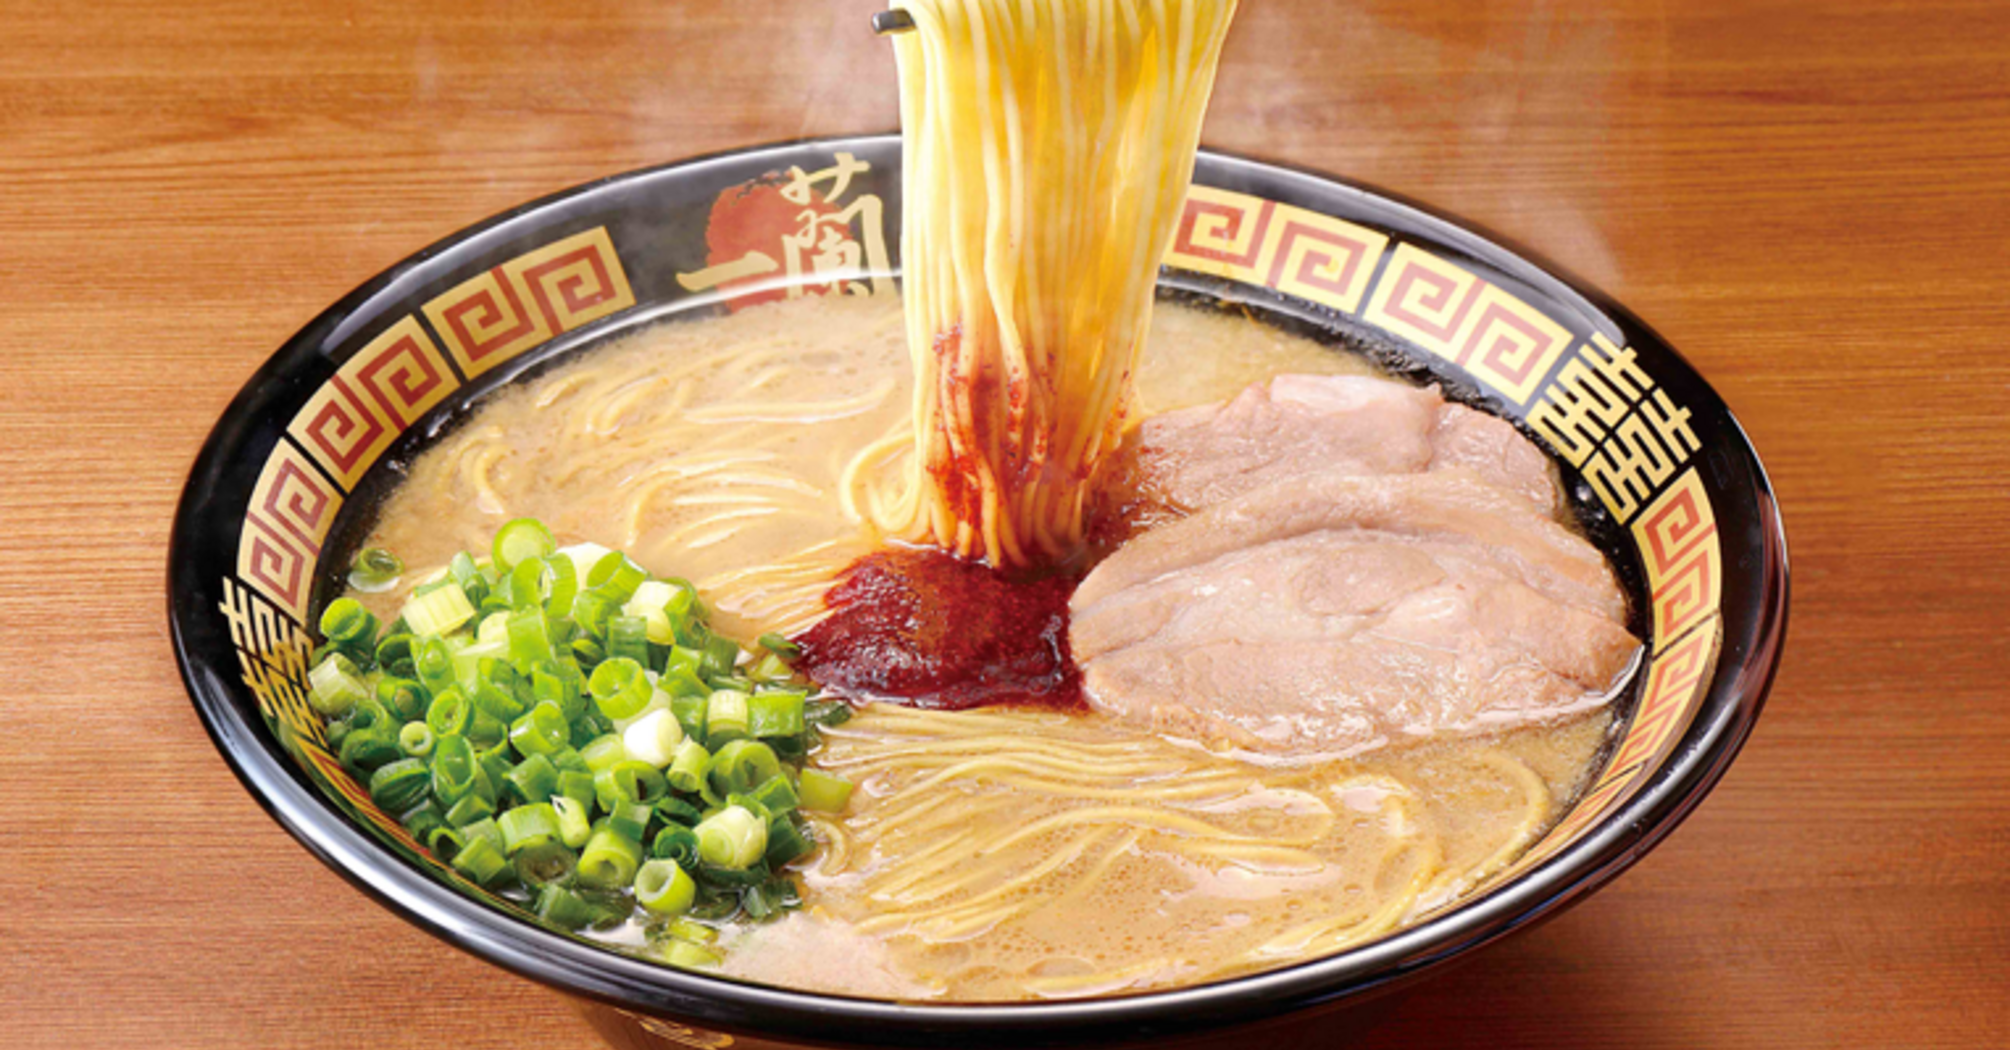 Restaurant for introverts: Where in Japan you can eat ramen without interacting with people